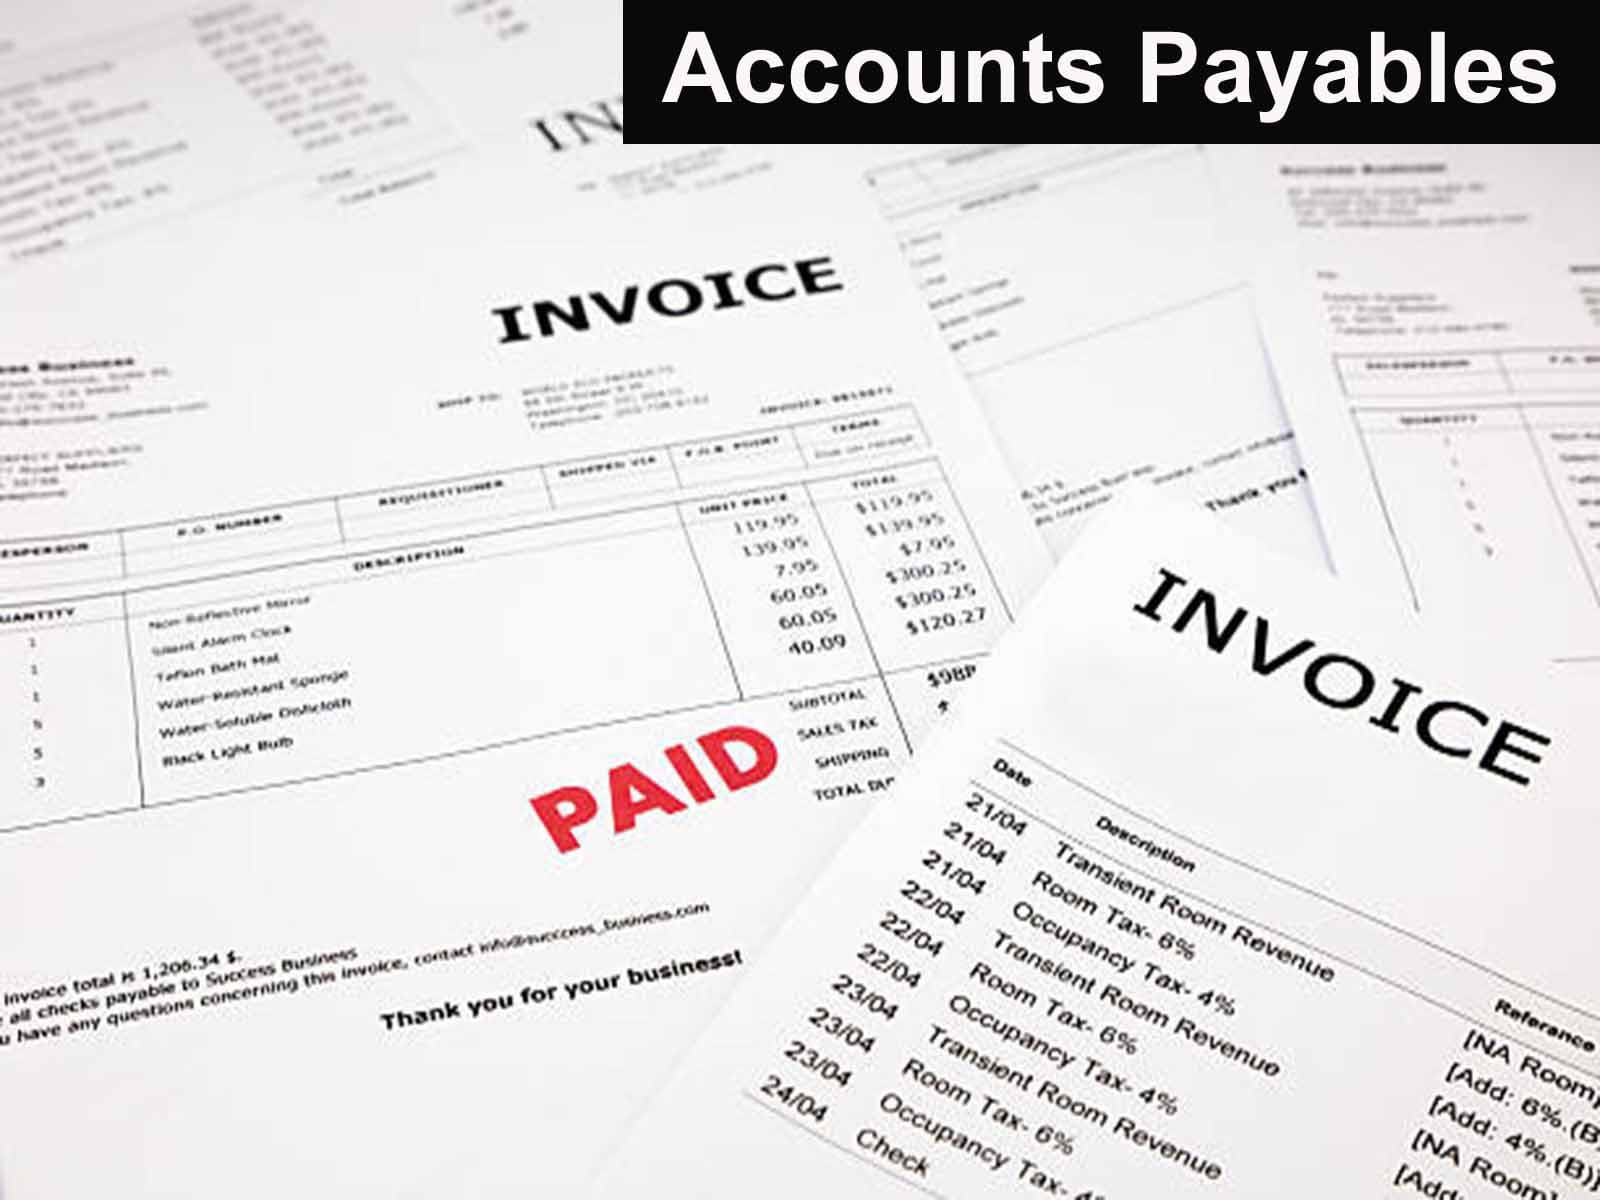 Automation for Accounts Payable in Hospitality Industry